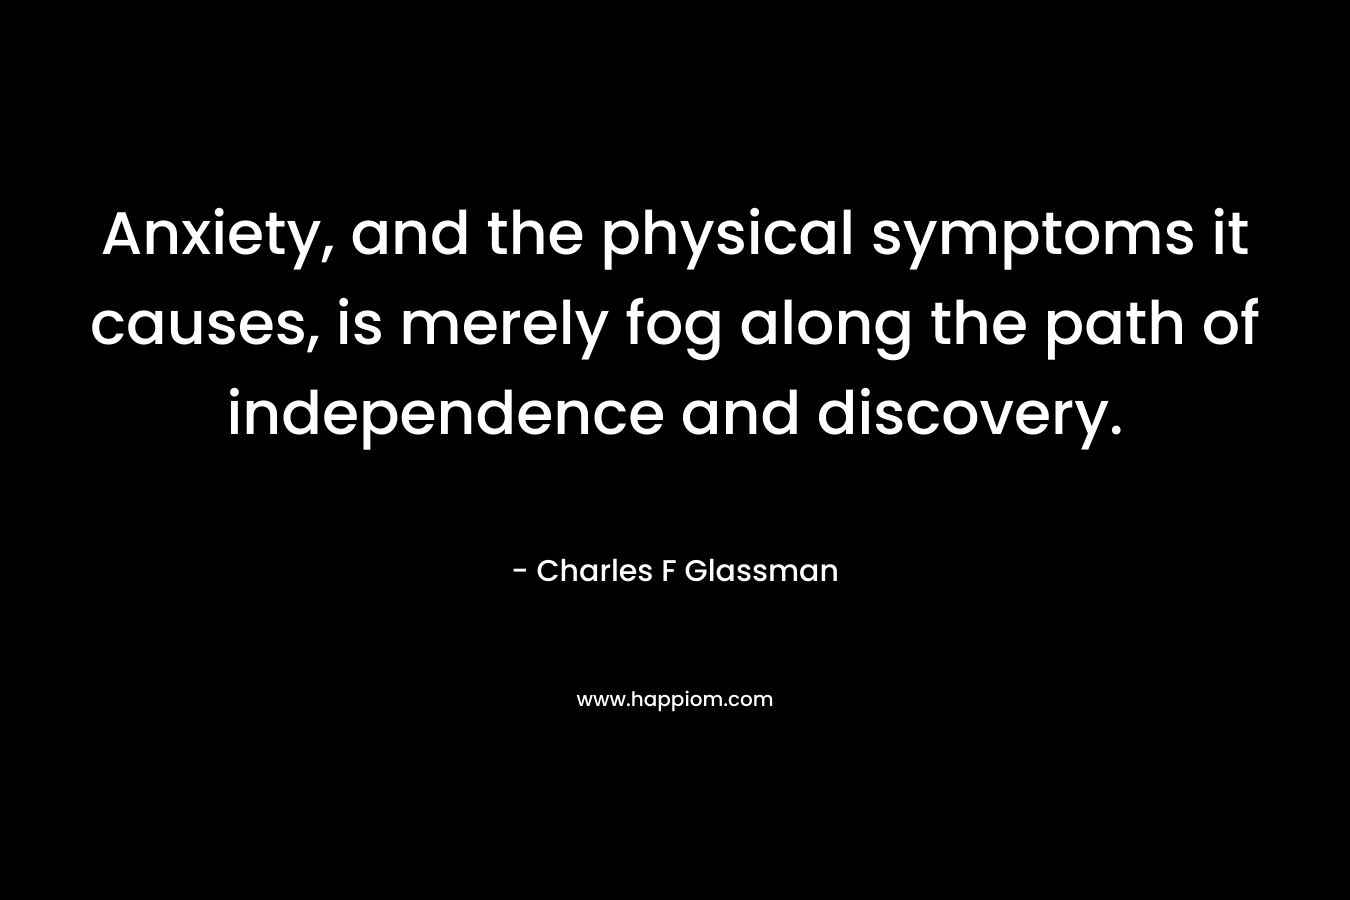 Anxiety, and the physical symptoms it causes, is merely fog along the path of independence and discovery. – Charles F Glassman